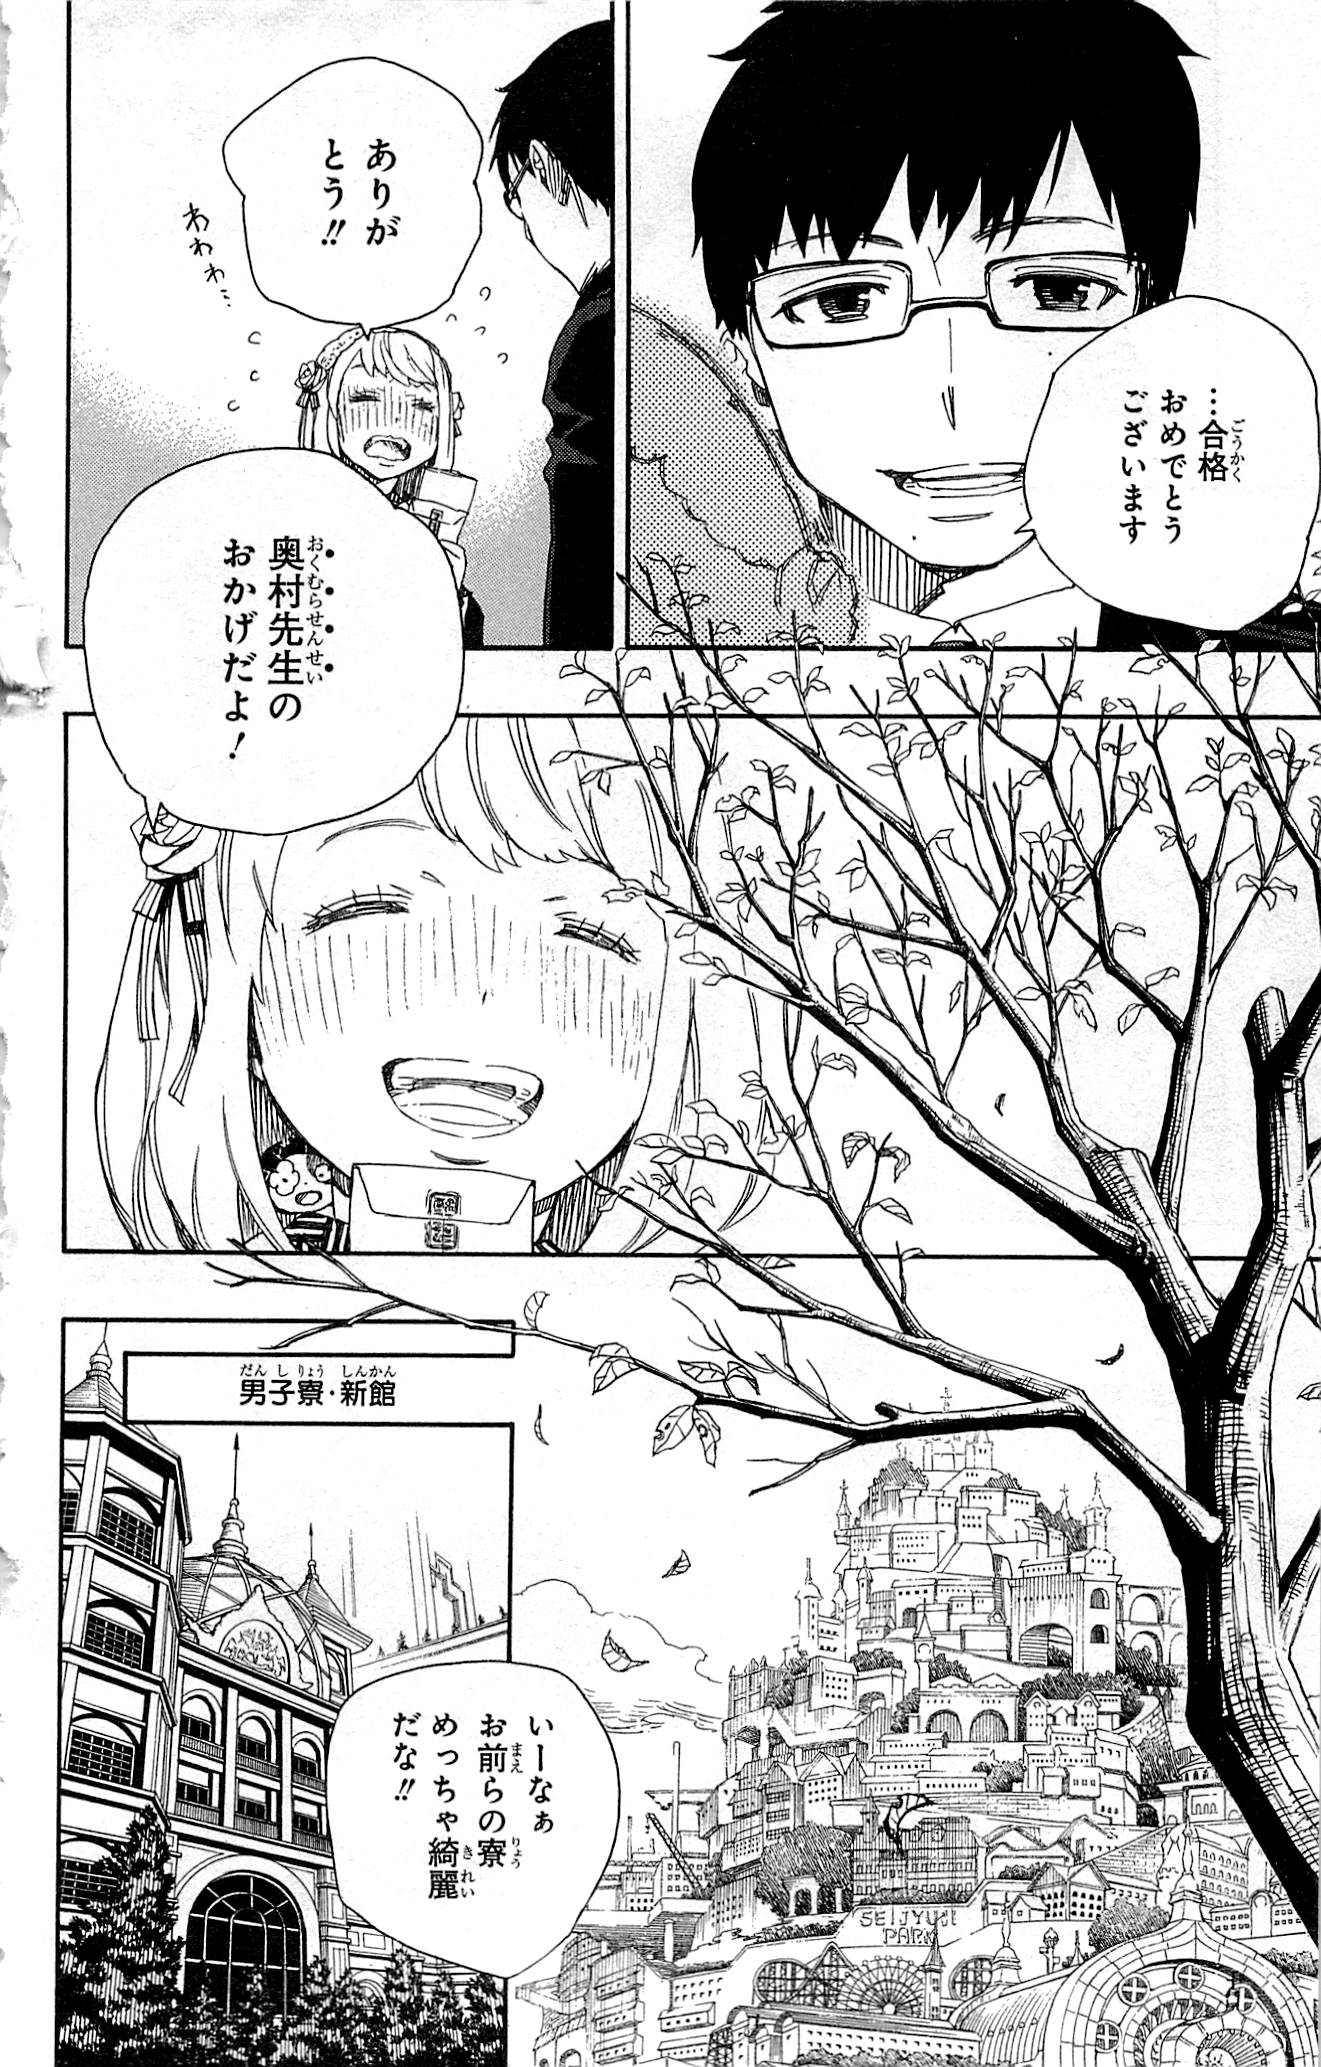 Ao no Exorcist - Chapter 45 - Page 2